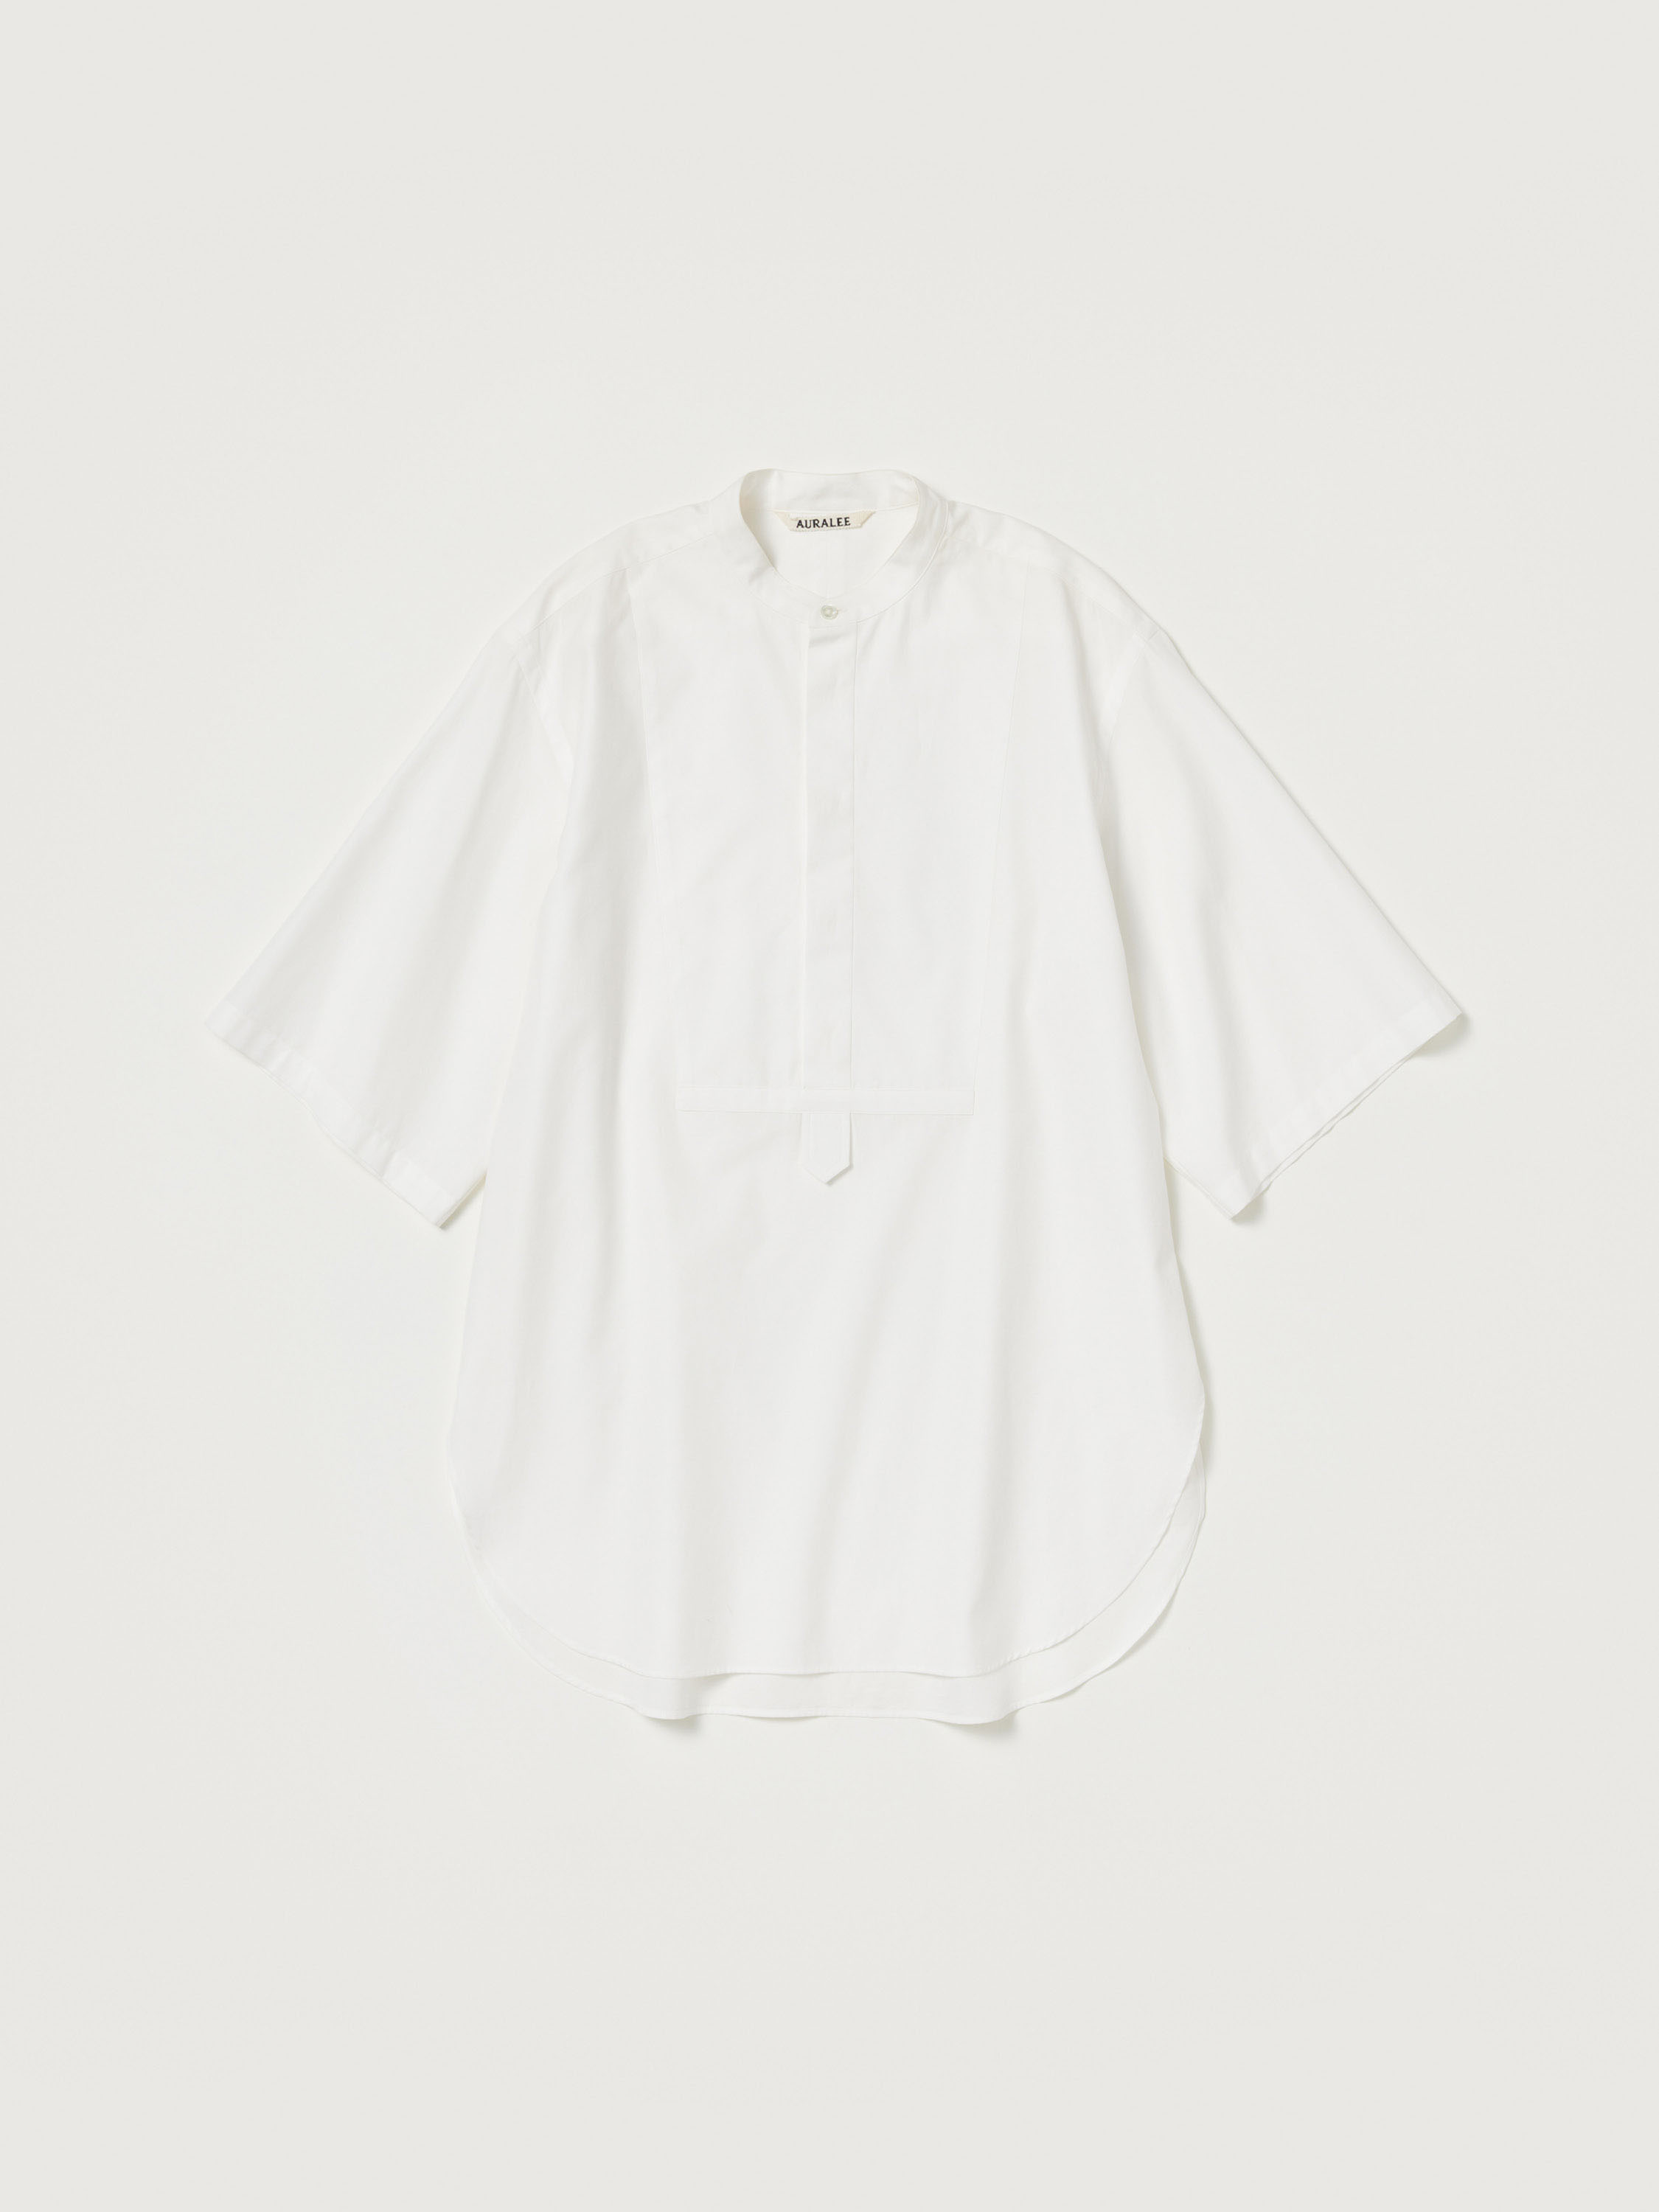 *WASHED FINX TWILL HALF SLEEVED P/O SHIRT 詳細画像 WHITE 1